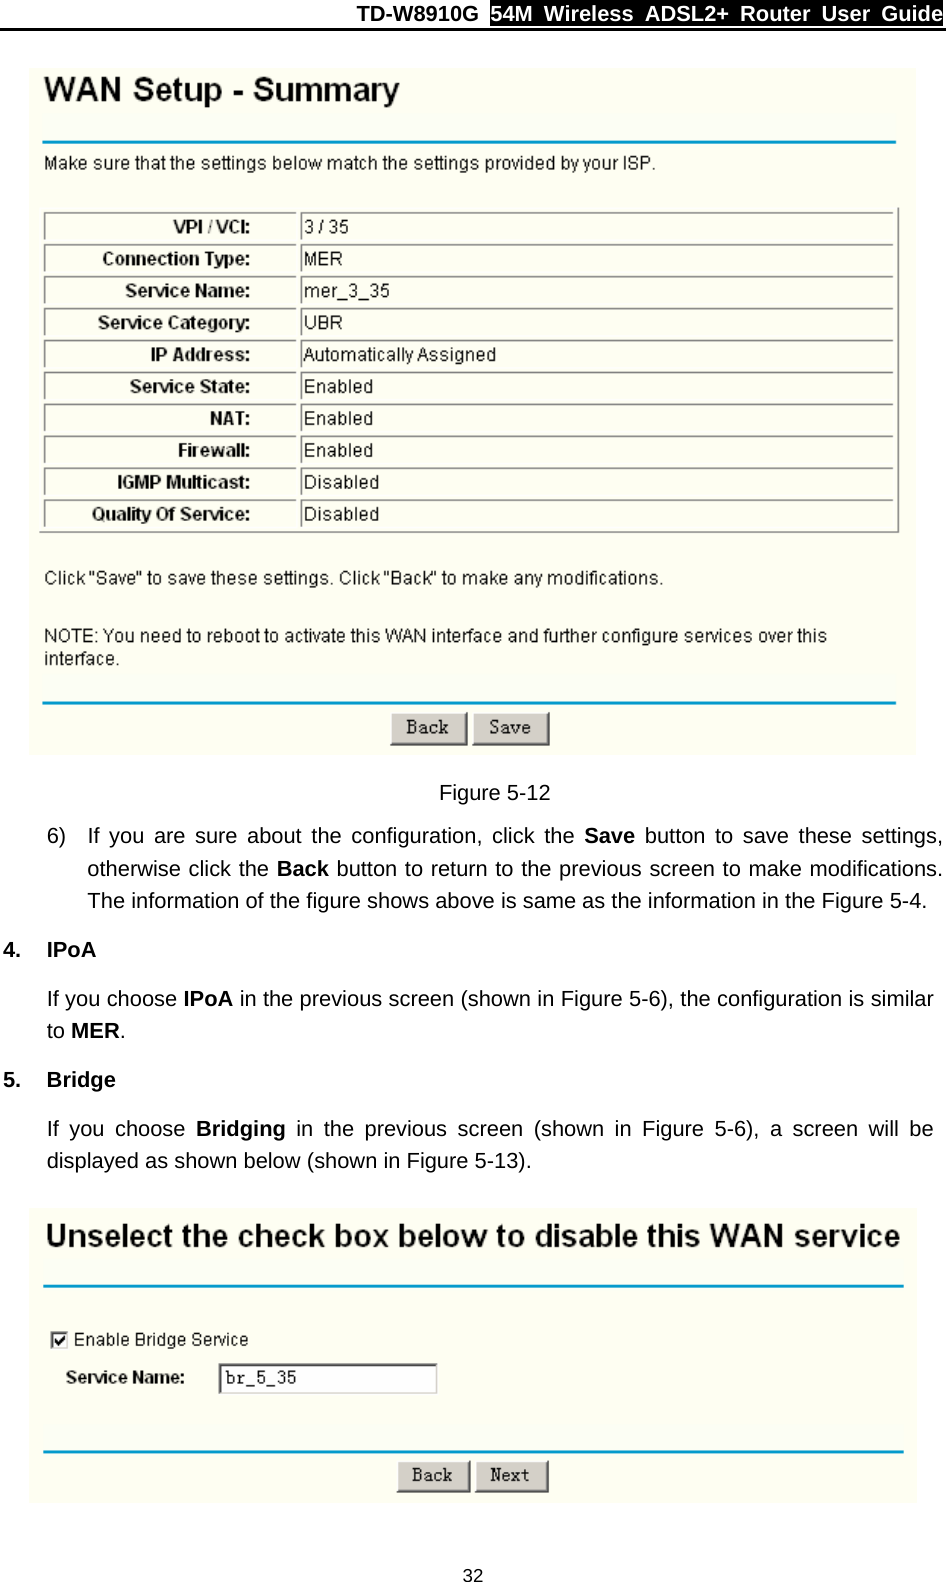 TD-W8910G  54M Wireless ADSL2+ Router User Guide  32 Figure 5-12 6)  If you are sure about the configuration, click the Save button to save these settings, otherwise click the Back button to return to the previous screen to make modifications. The information of the figure shows above is same as the information in the Figure 5-4. 4. IPoA If you choose IPoA in the previous screen (shown in Figure 5-6), the configuration is similar to MER. 5. Bridge If you choose Bridging in the previous screen (shown in Figure 5-6), a screen will be displayed as shown below (shown in Figure 5-13).  